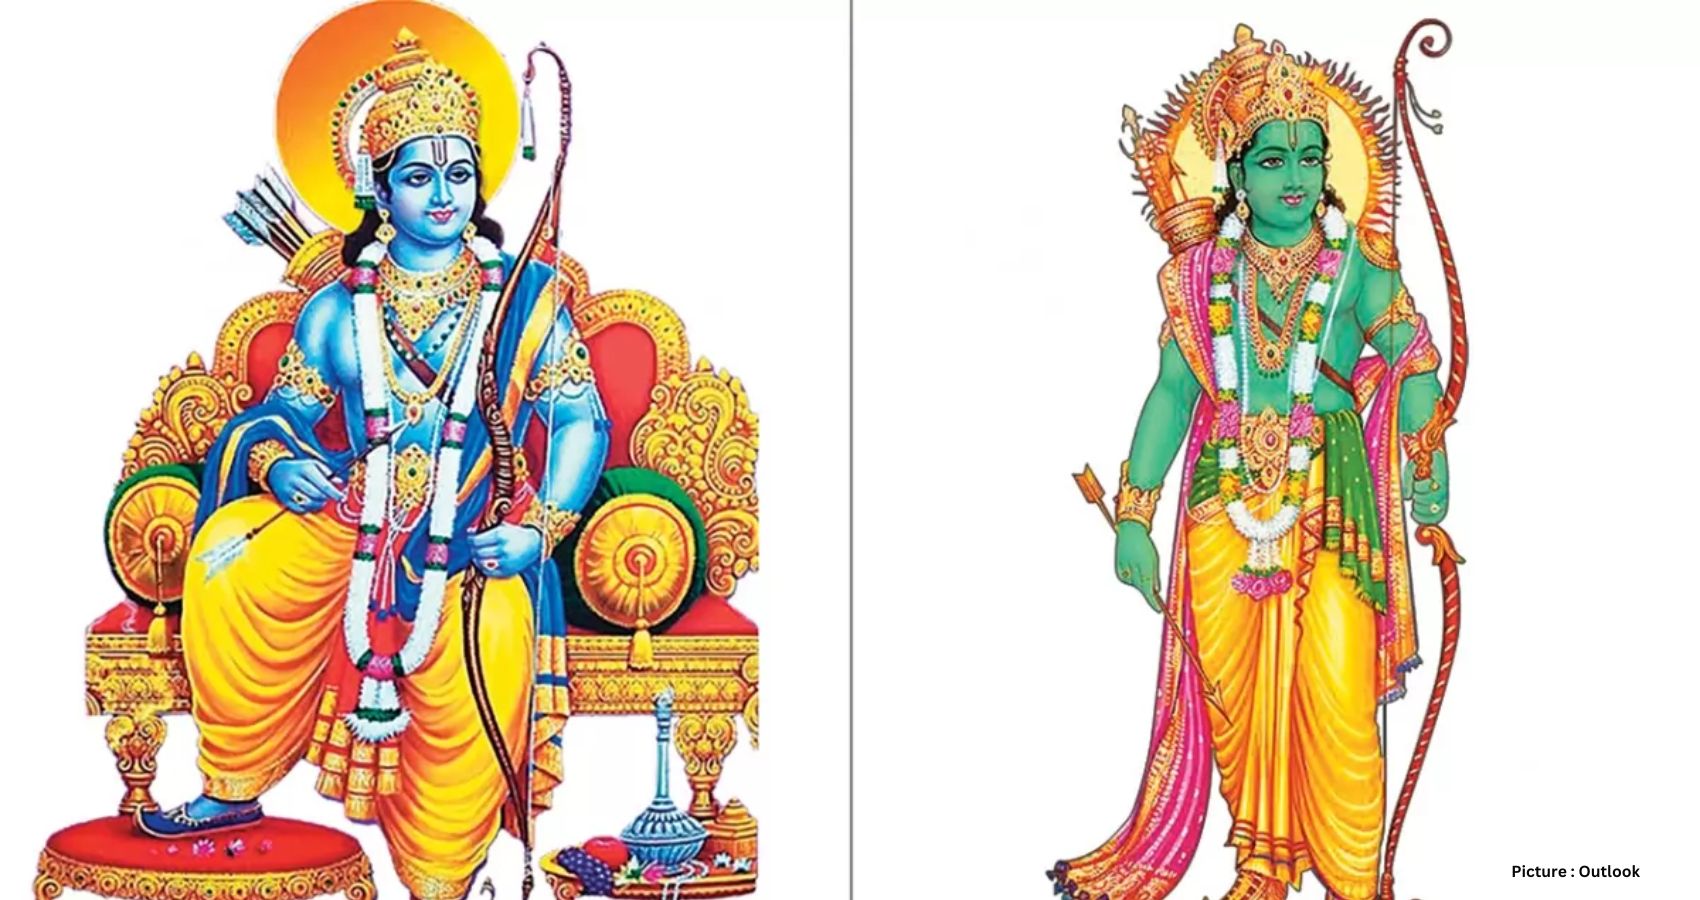 Shades of Divinity: Debating the Complexion of Lord Ram in Contemporary Politics